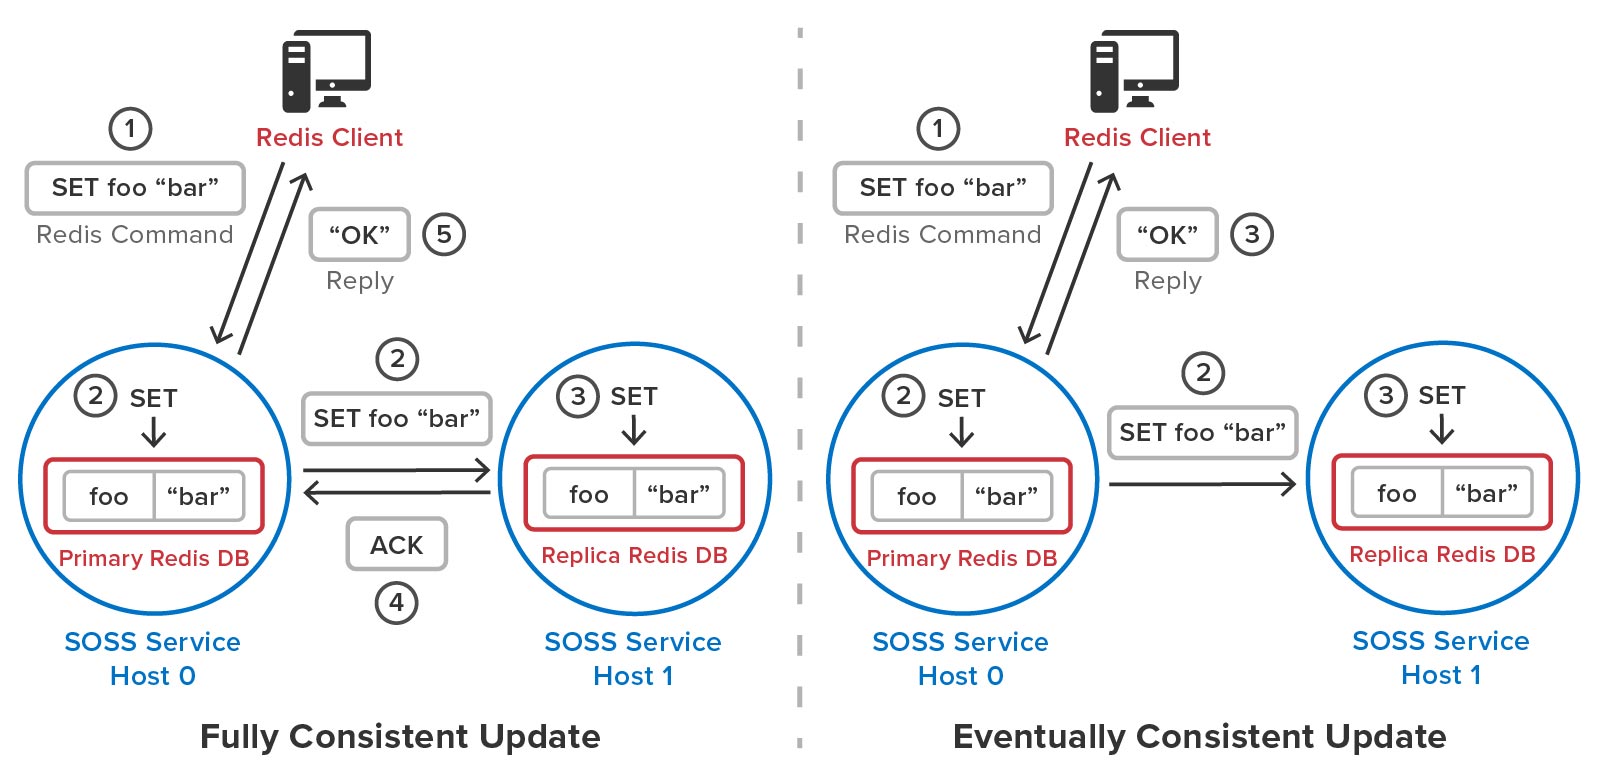 ScaleOut StateServer implements fully consistent updates to stored data unlike Redis, which uses eventually consistent updates.